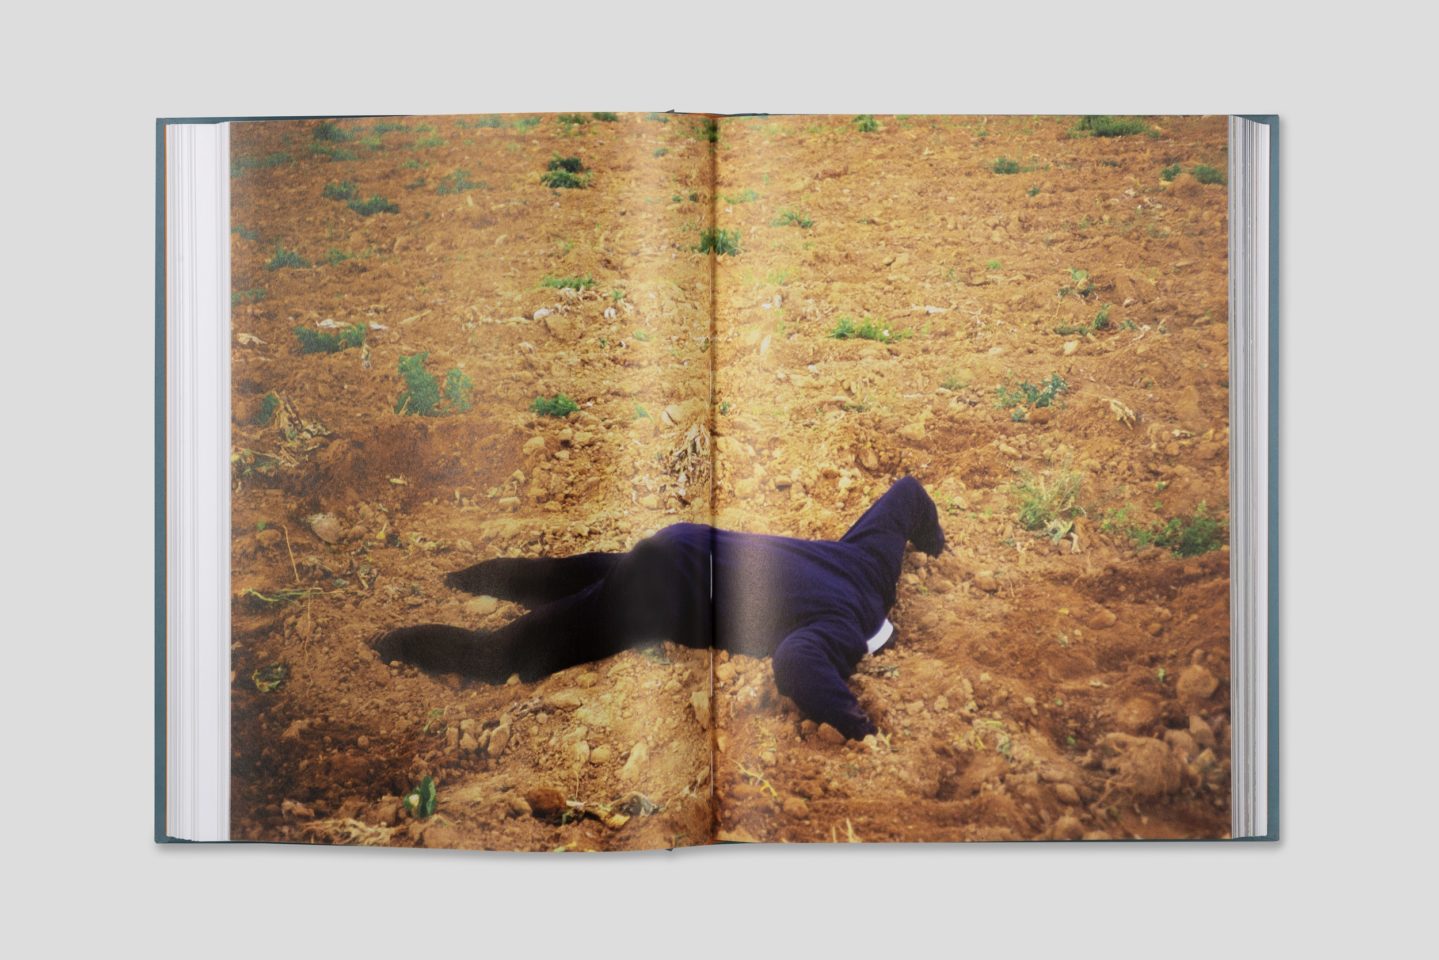 Aphoto of a book lying open on a plain white surface. The pages of the book show an image of a person with their head stuck in a hole in the ground.